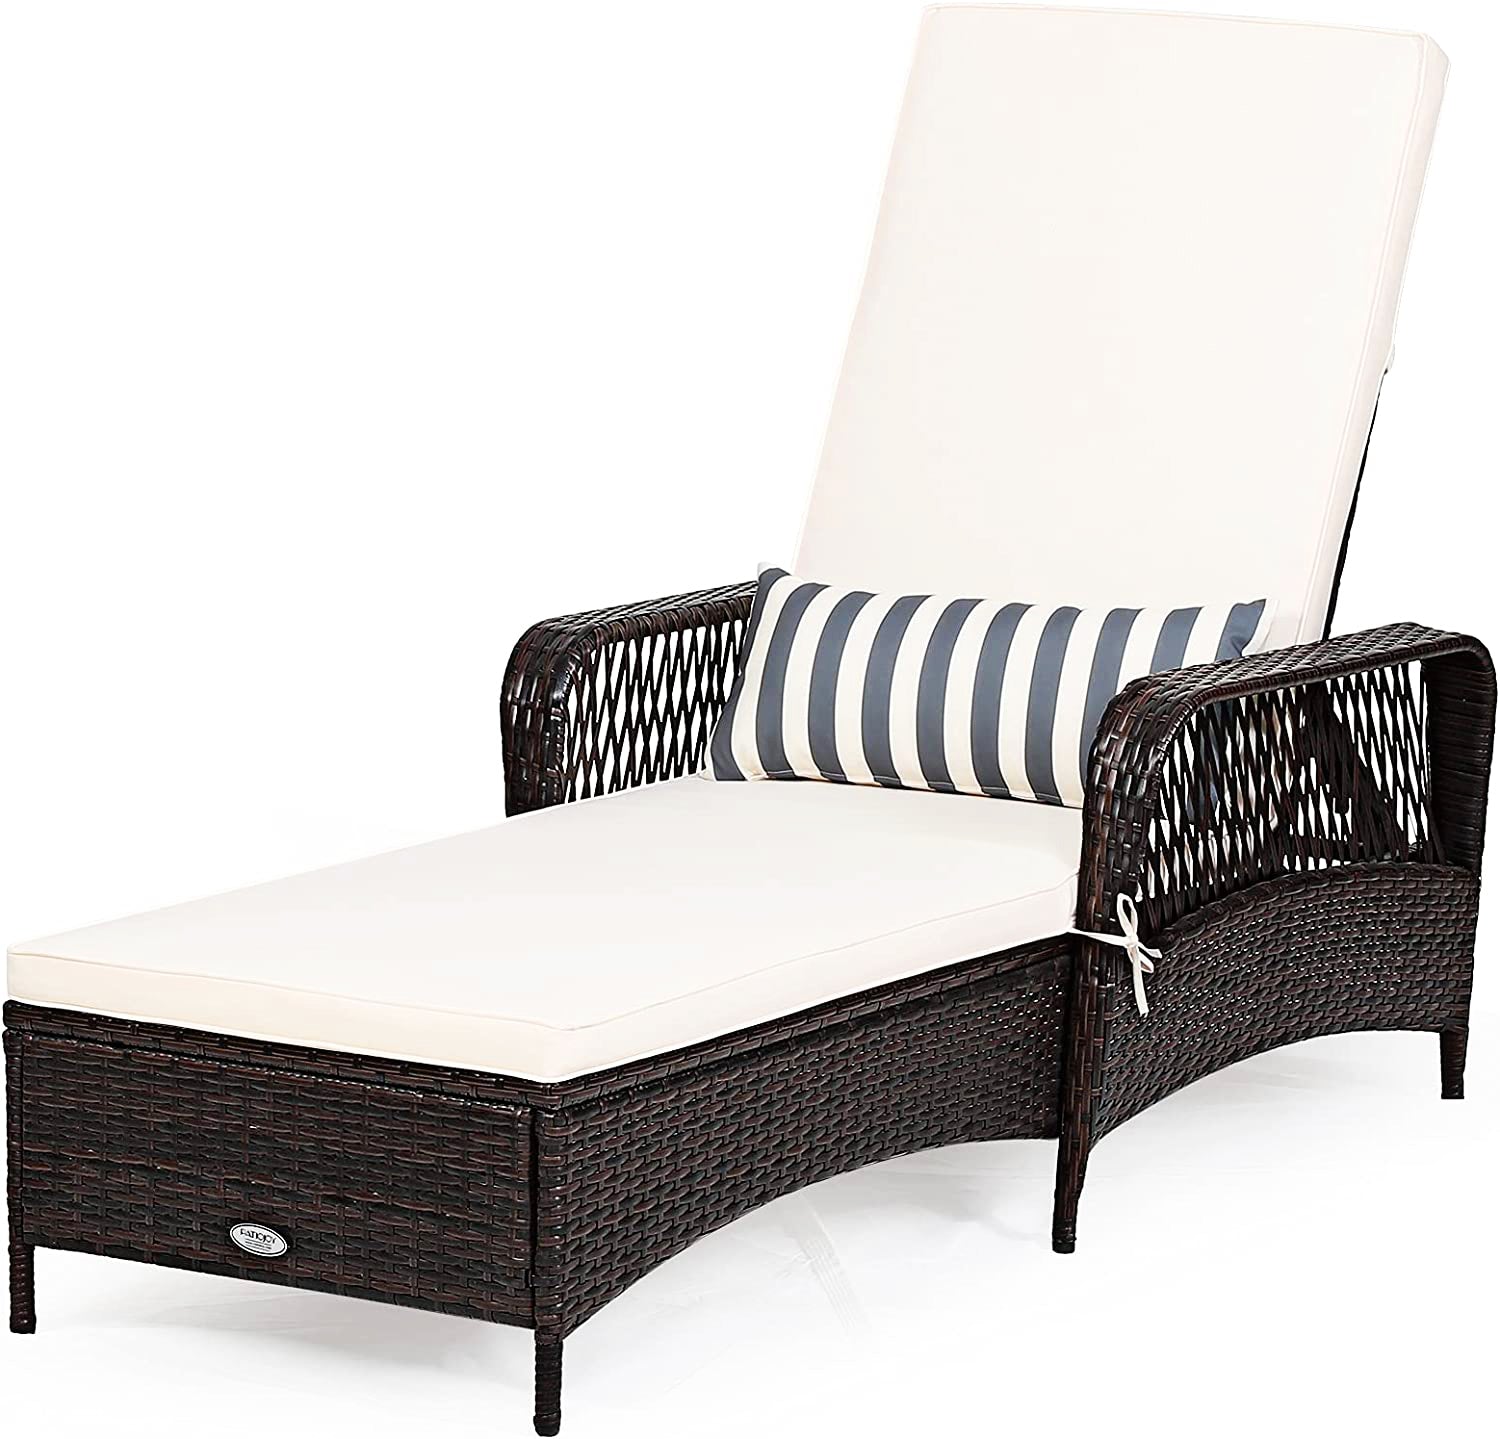 1-Piece Wicker Outdoor Chaise Lounge with Beige Cushions